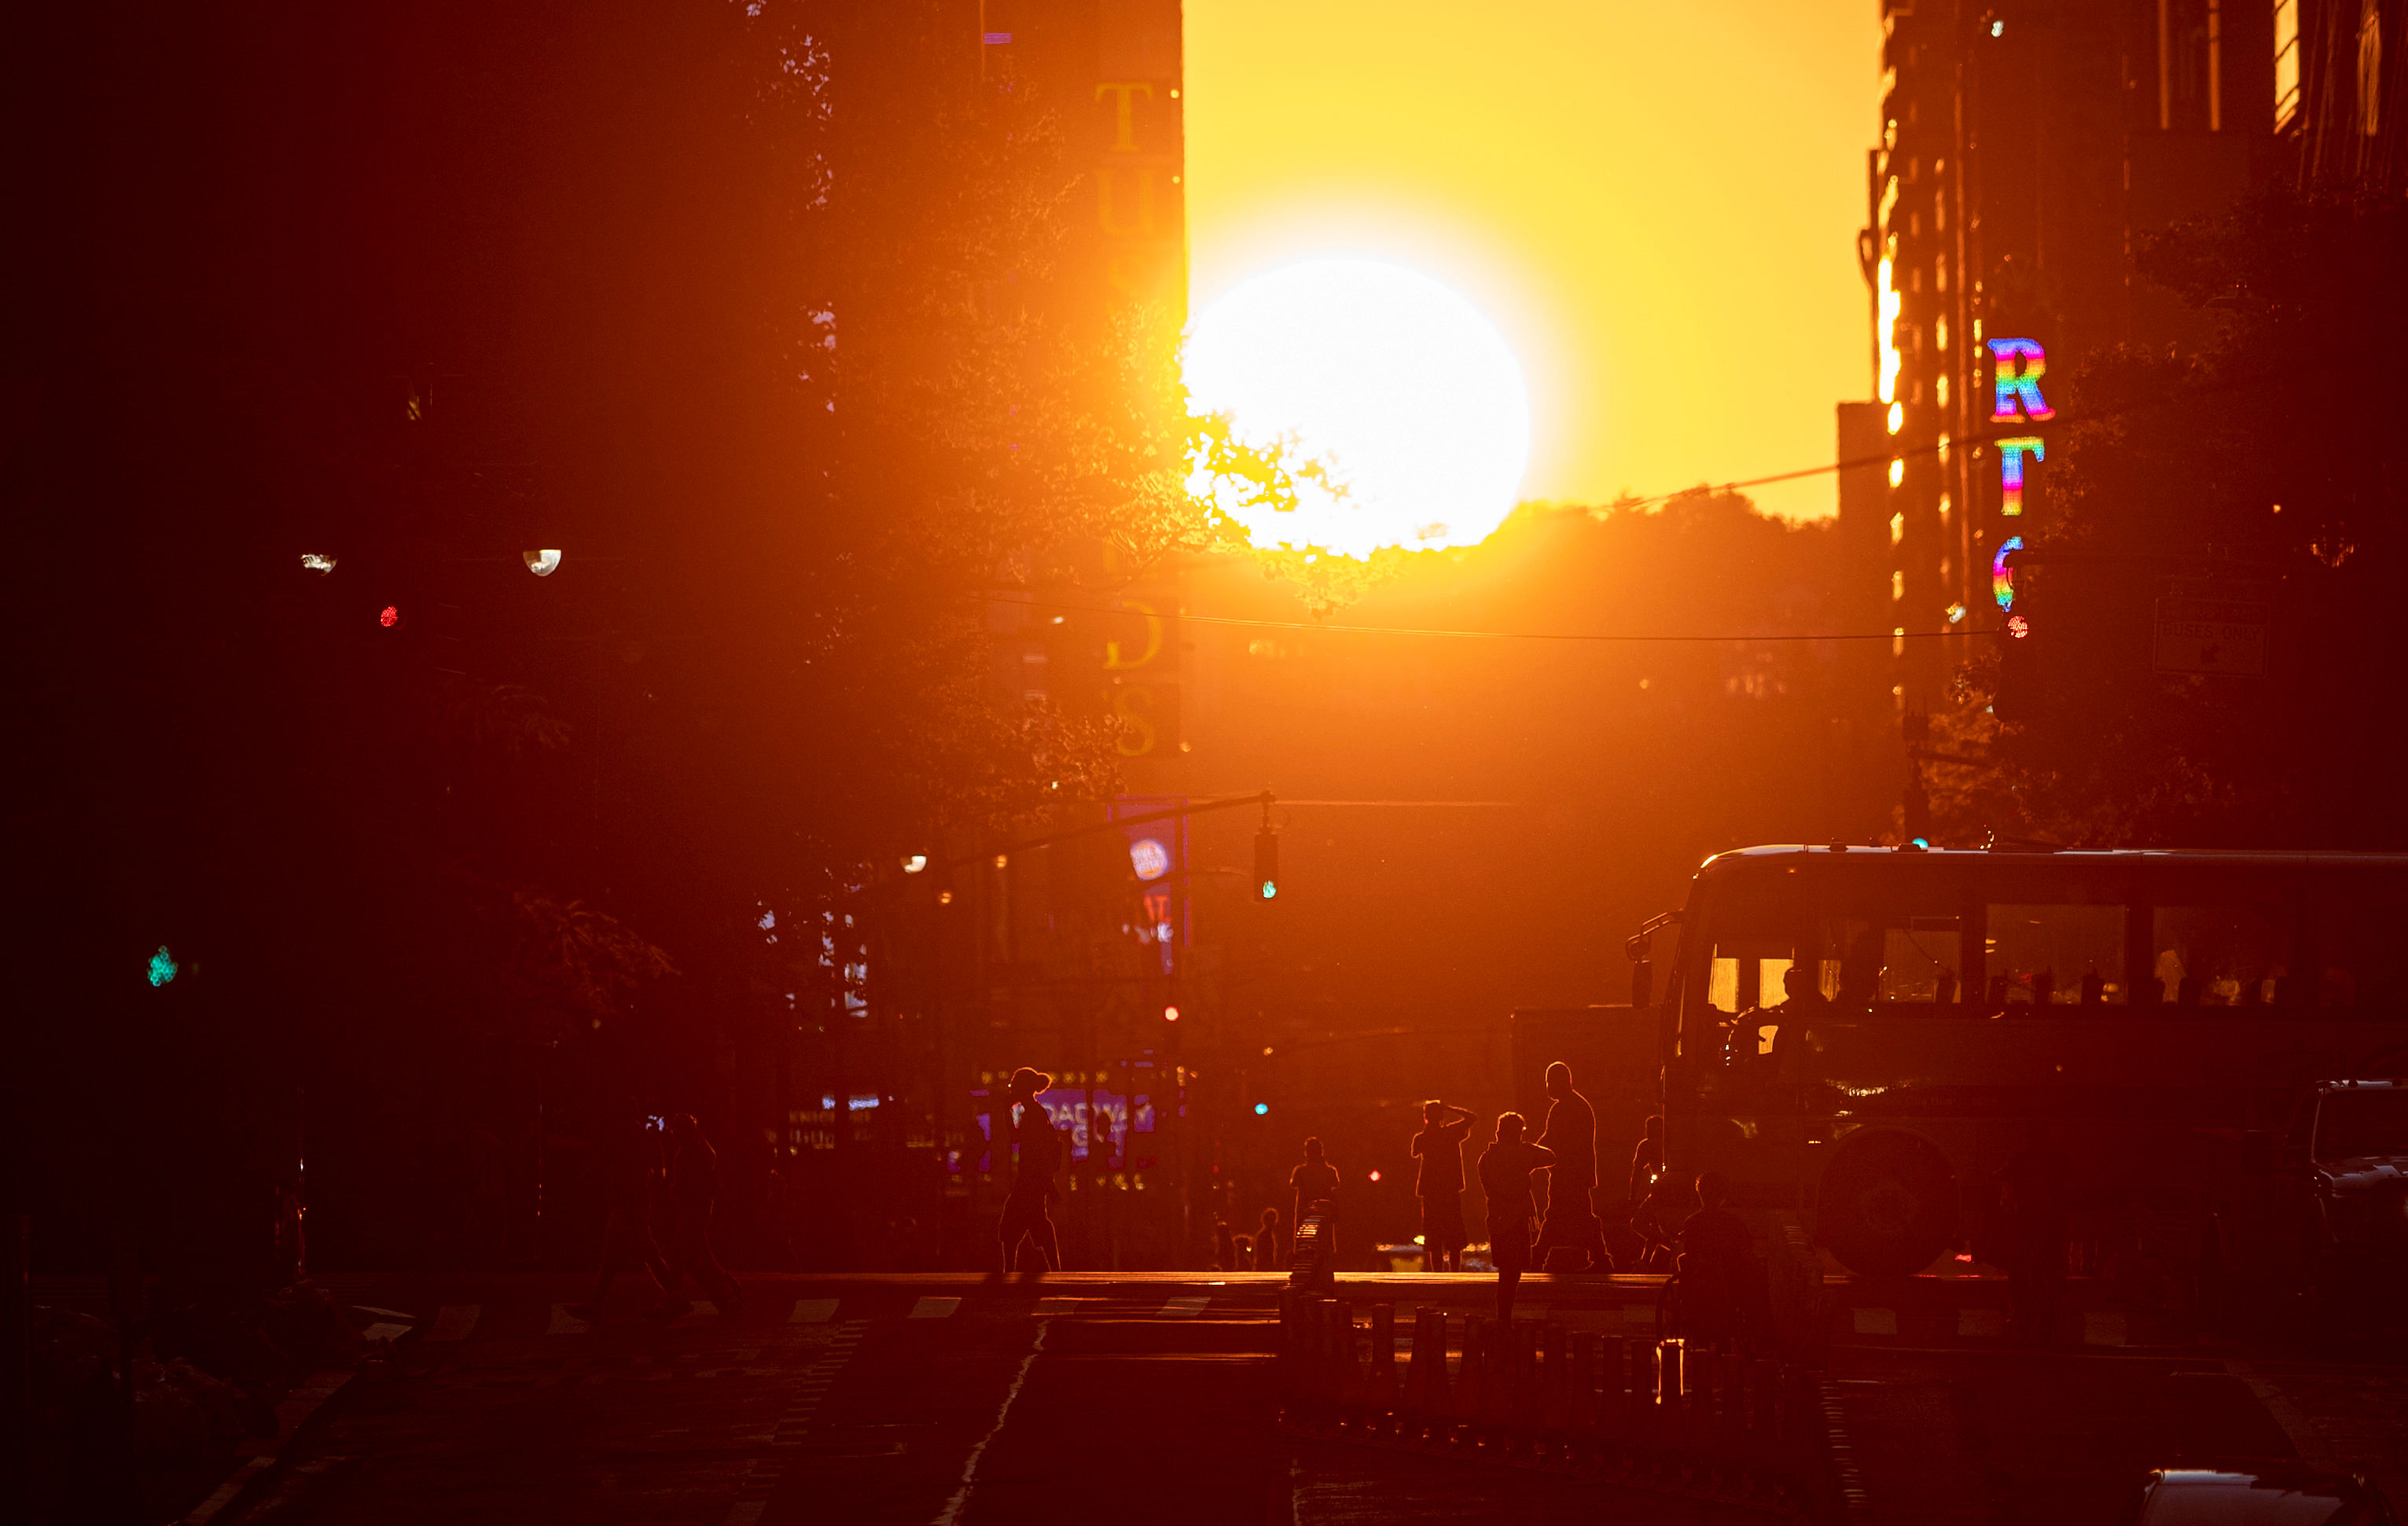 The sun sets along 42nd Street, during the so called "Manhattanhenge", on July 13, 2020 in New York City. - The so called Manhattanhenge happens four times each year, when when the sun rises or sets in New York City parallel to the city street grid in Manhattan. Credit: AFP